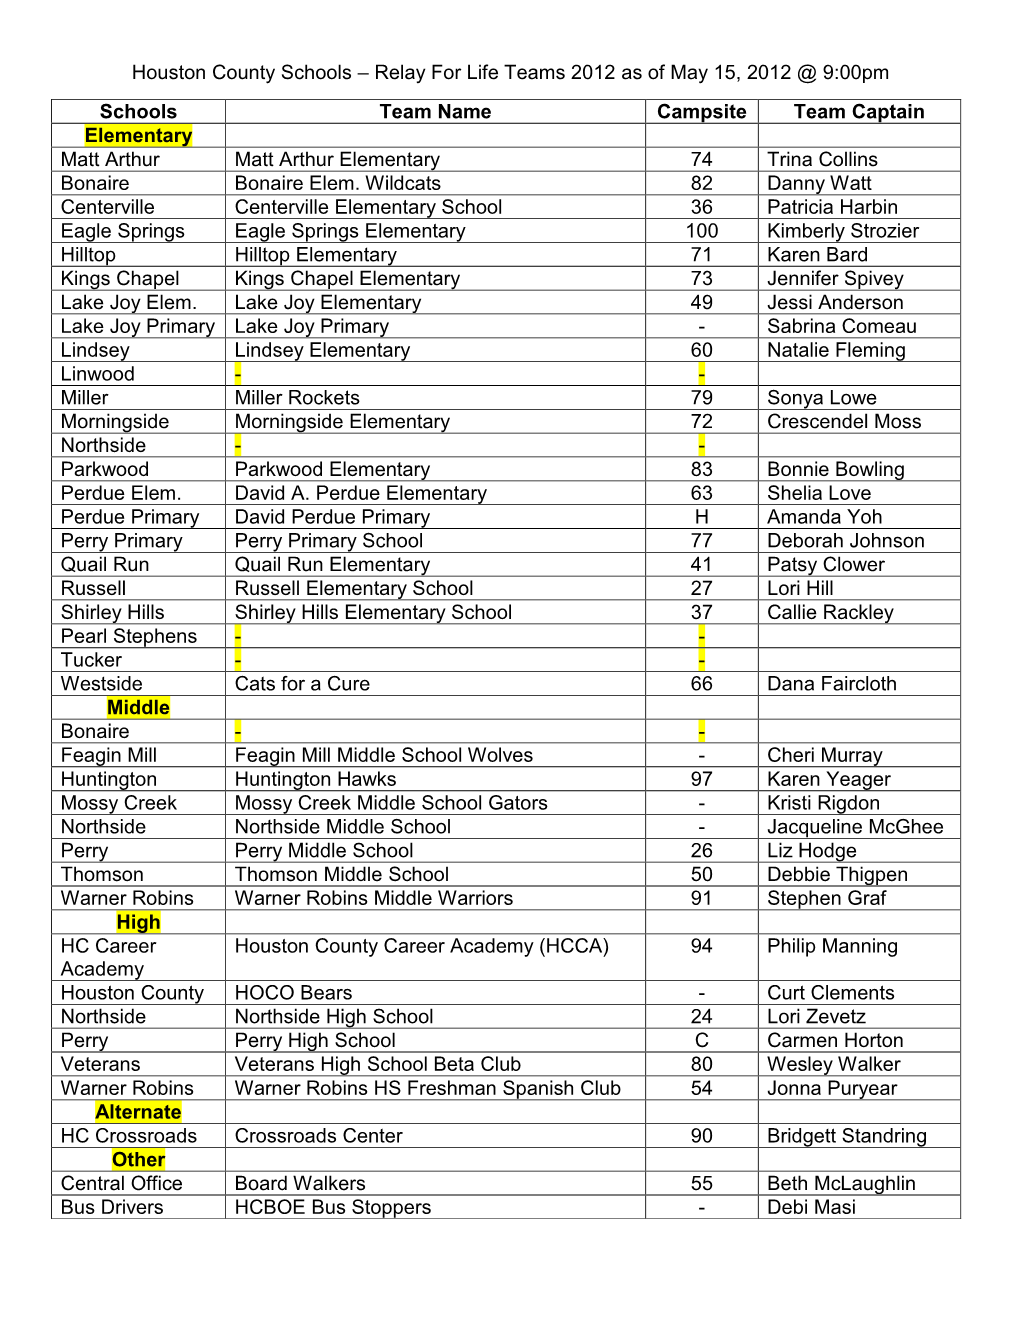 Houston County Schools – Relay for Life Teams 2012 As of May 15, 2012 @ 9:00Pm